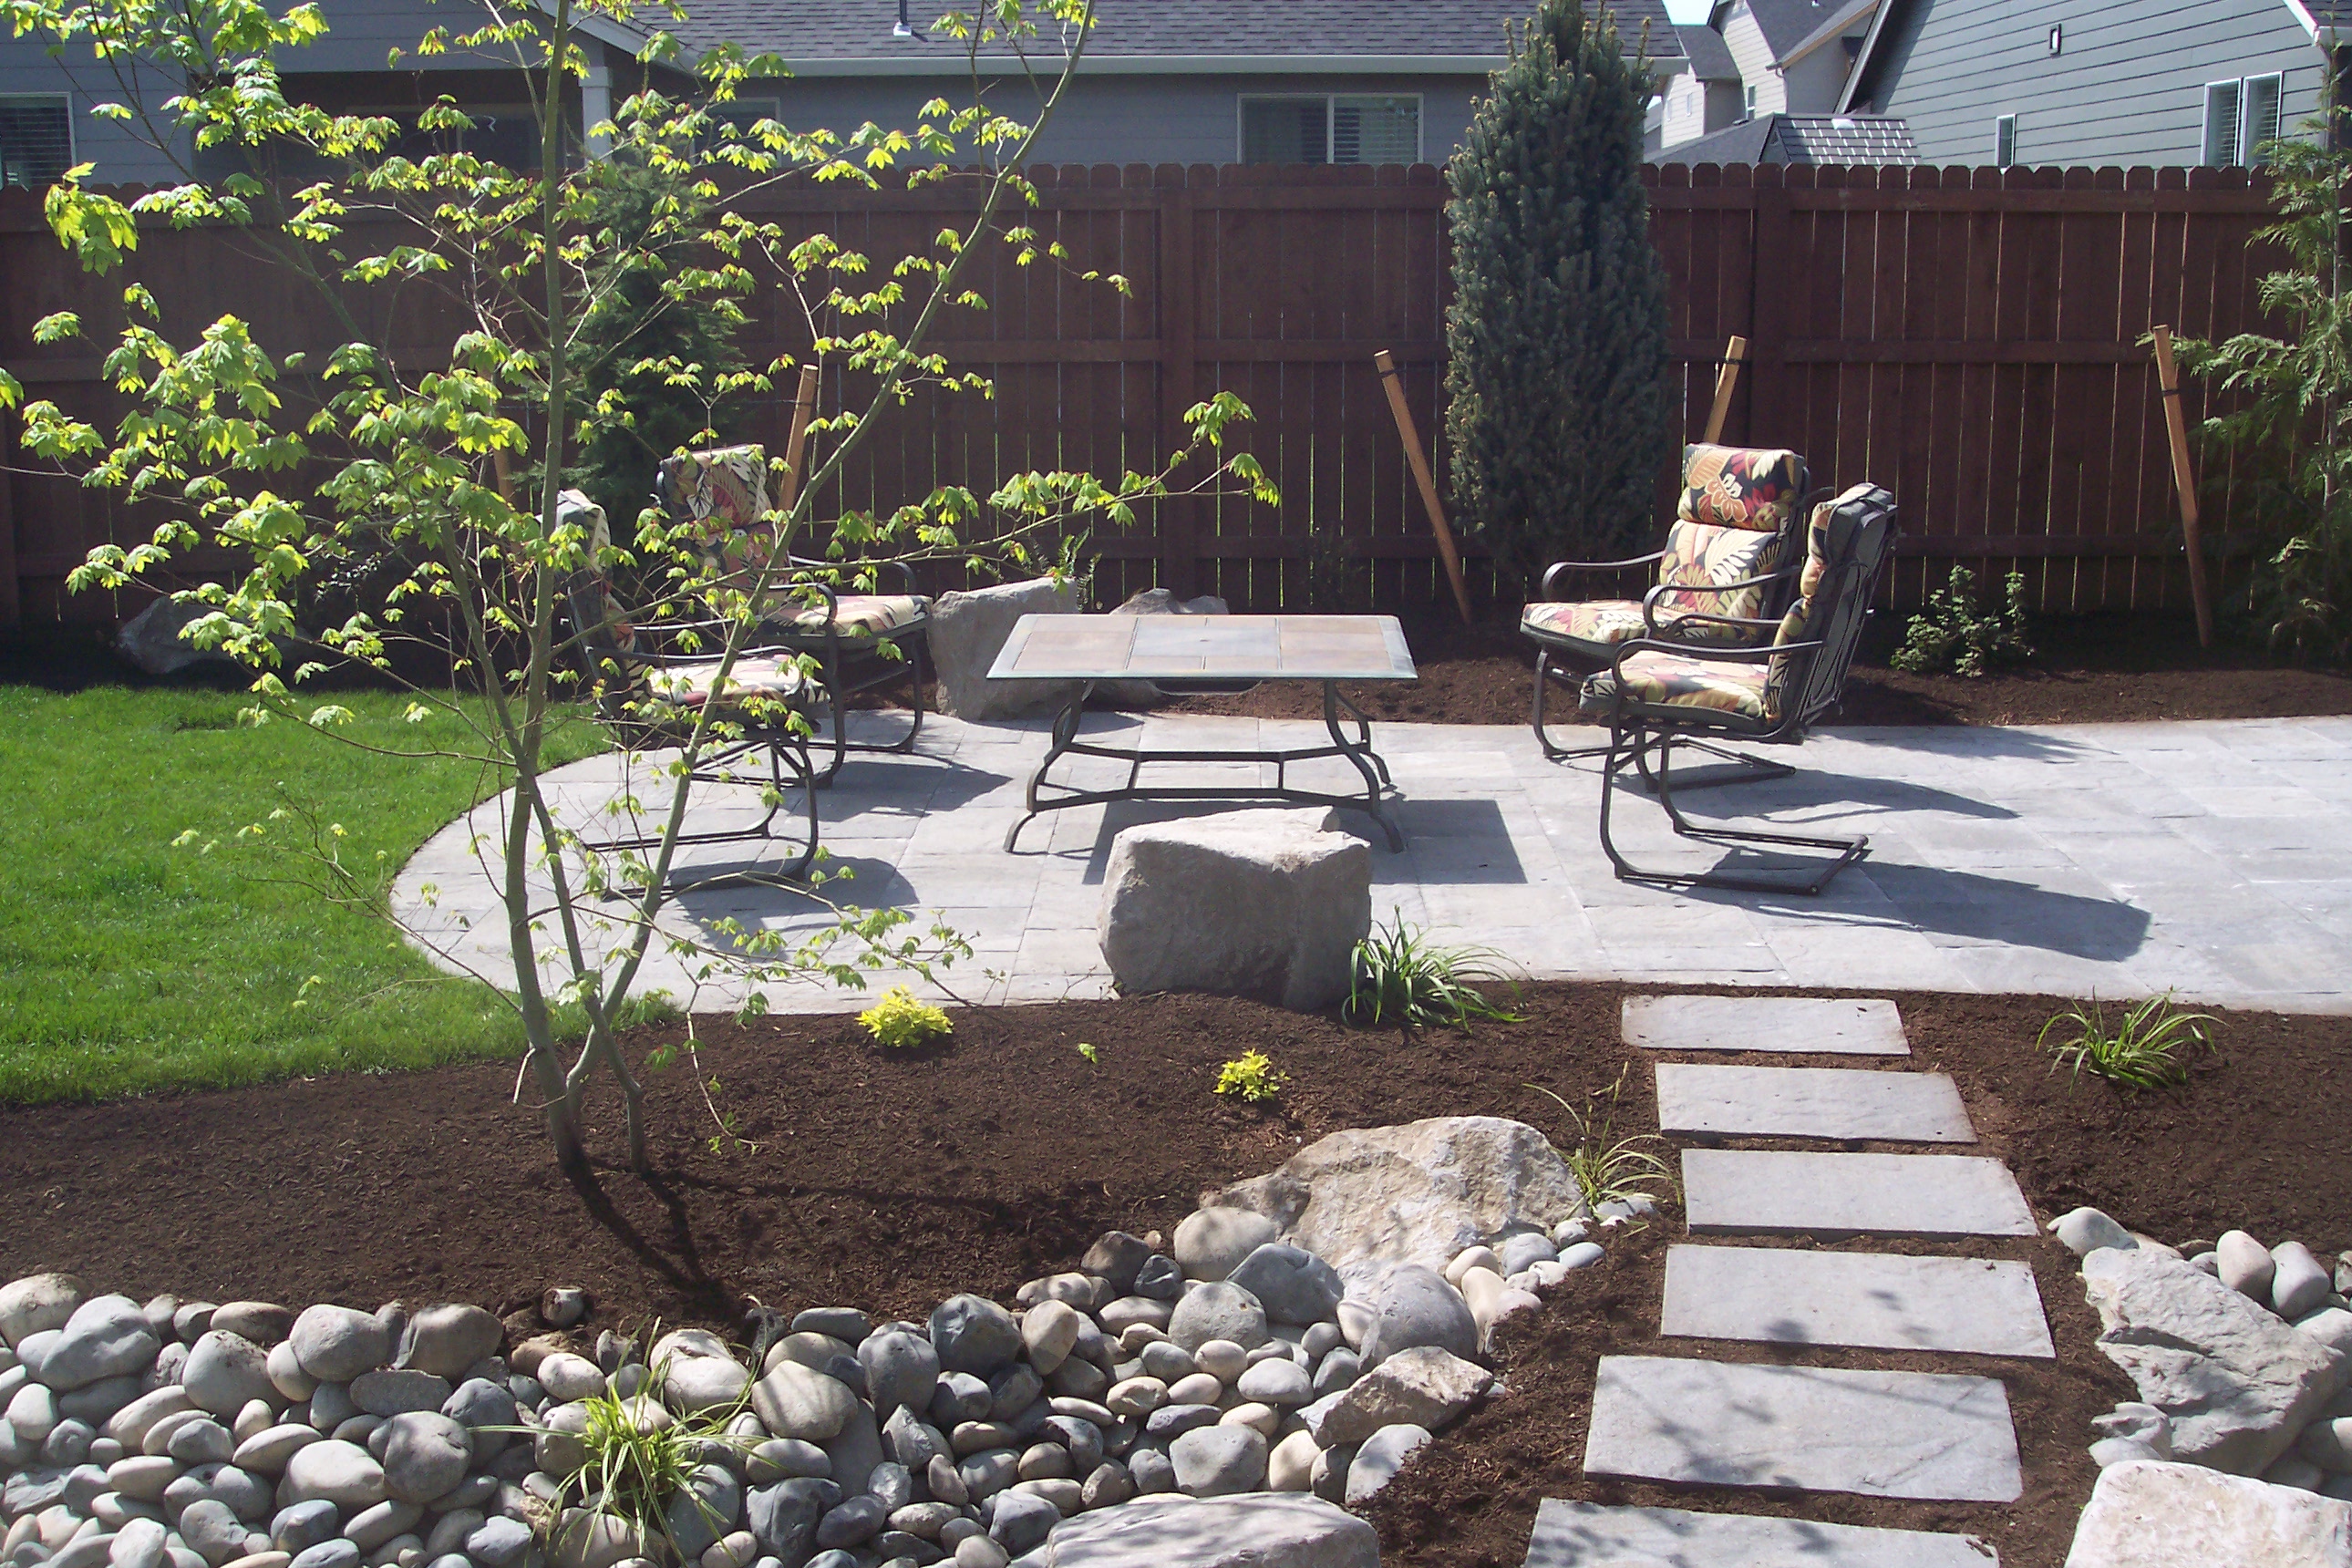 Image of a path and patio with a rock garden along the path, leading to a picnic table on the patio.